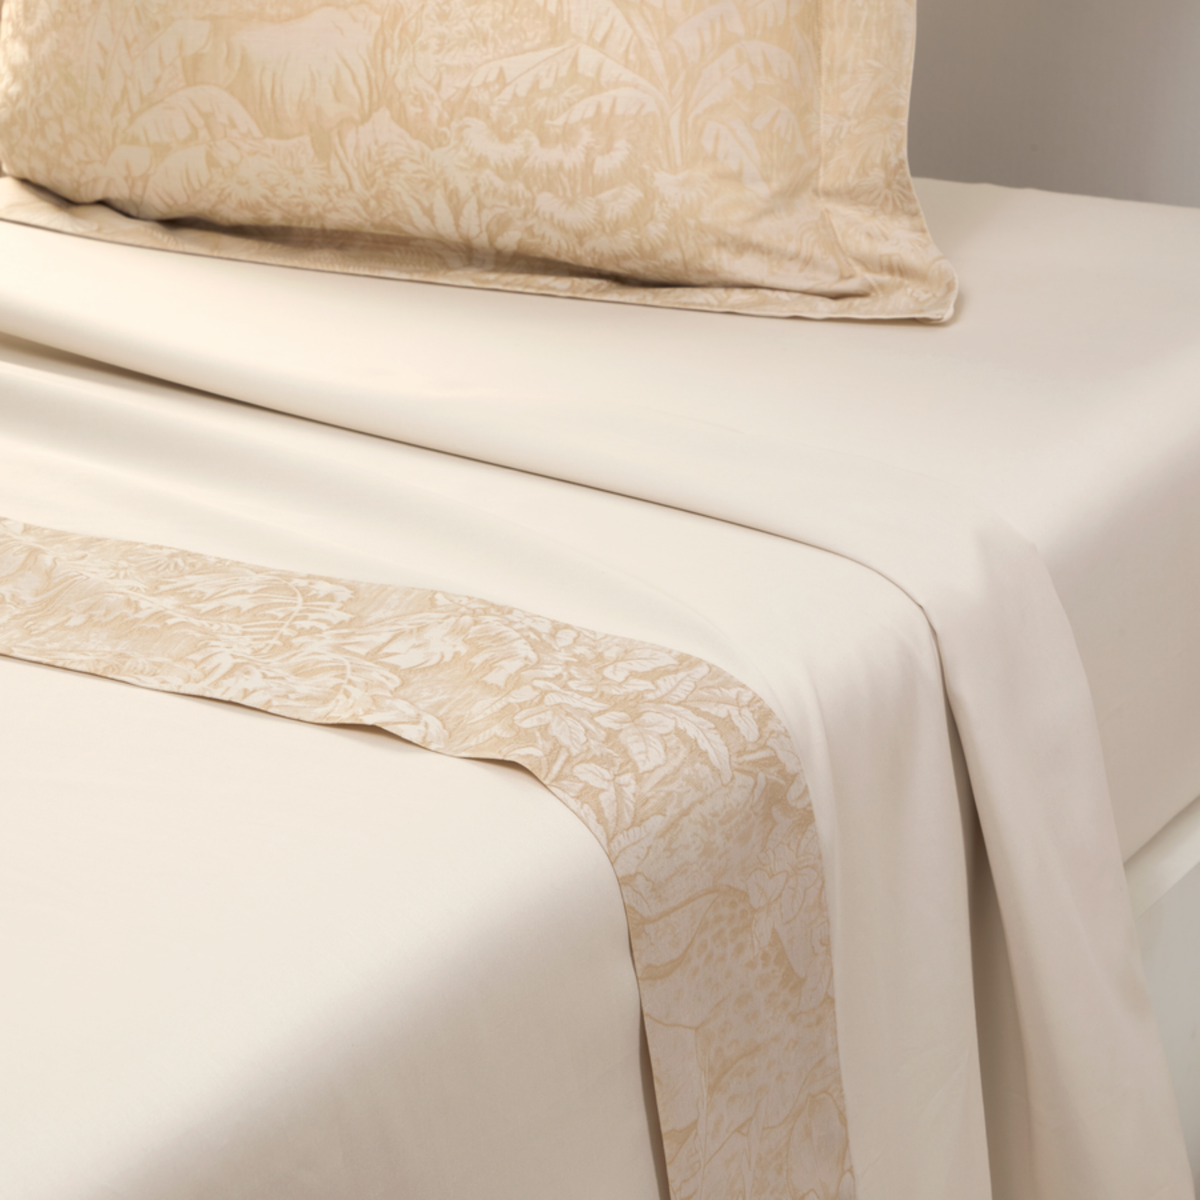 Flat Sheet of Yves Delorme Faune Bedding